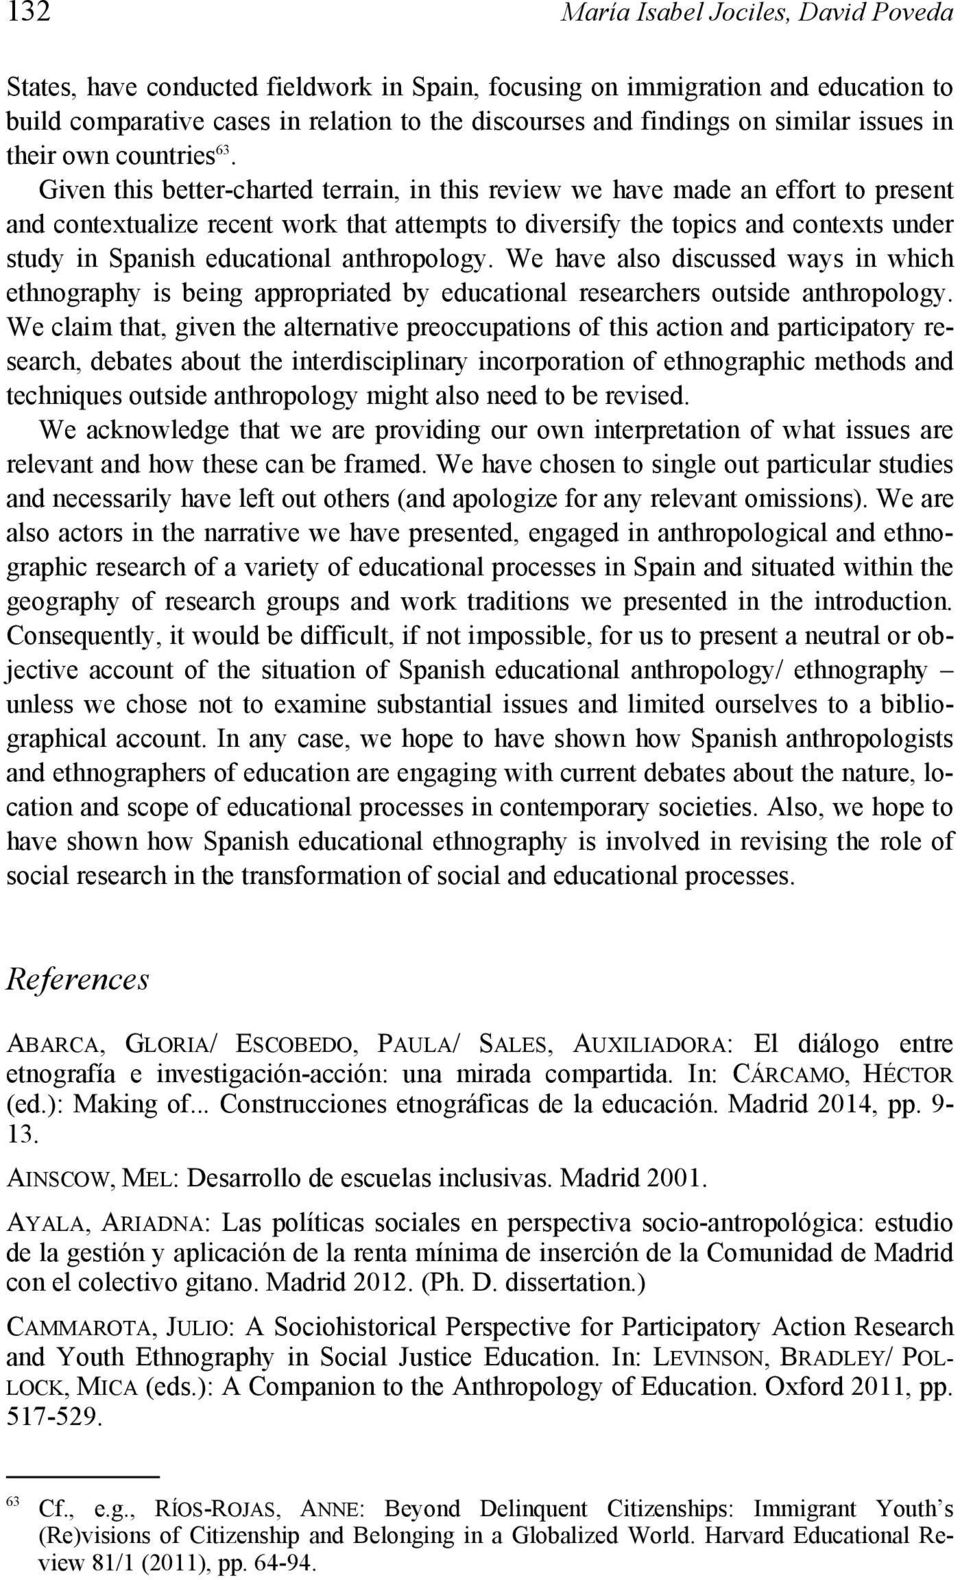 Given this better-charted terrain, in this review we have made an effort to present and contextualize recent work that attempts to diversify the topics and contexts under study in Spanish educational